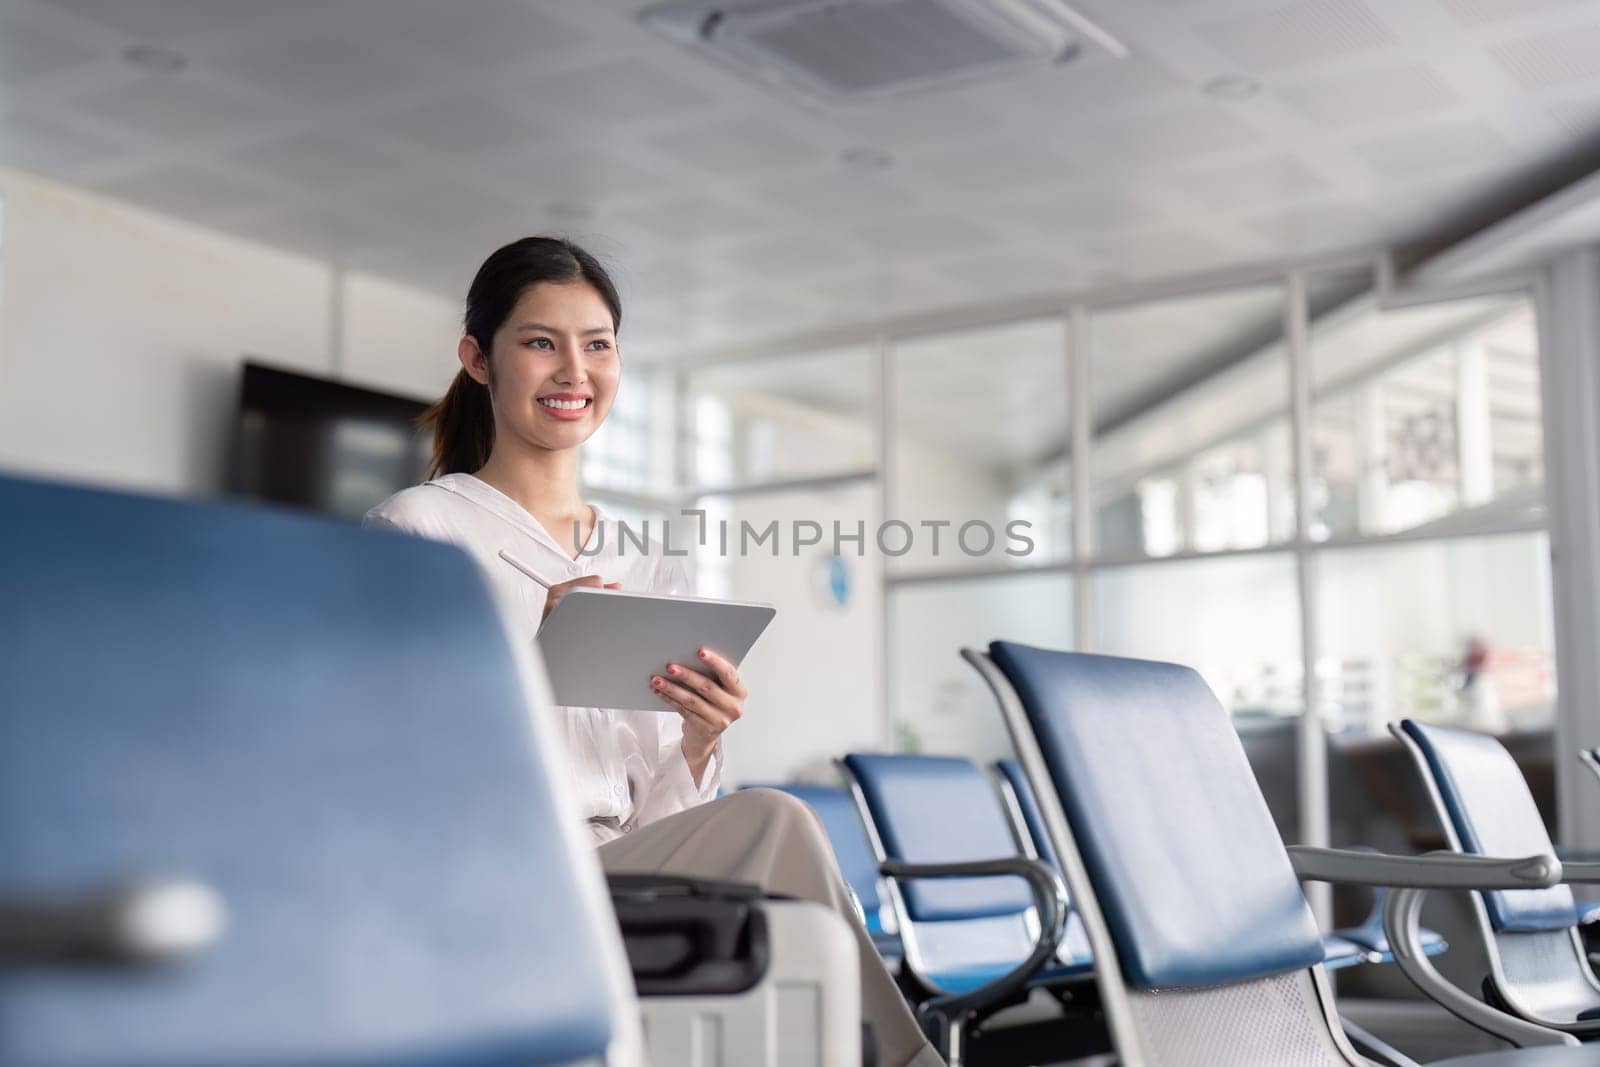 A business professional using a tablet in a modern airport lounge, featuring glass partitions and comfortable seating, ideal for business travel and productivity.